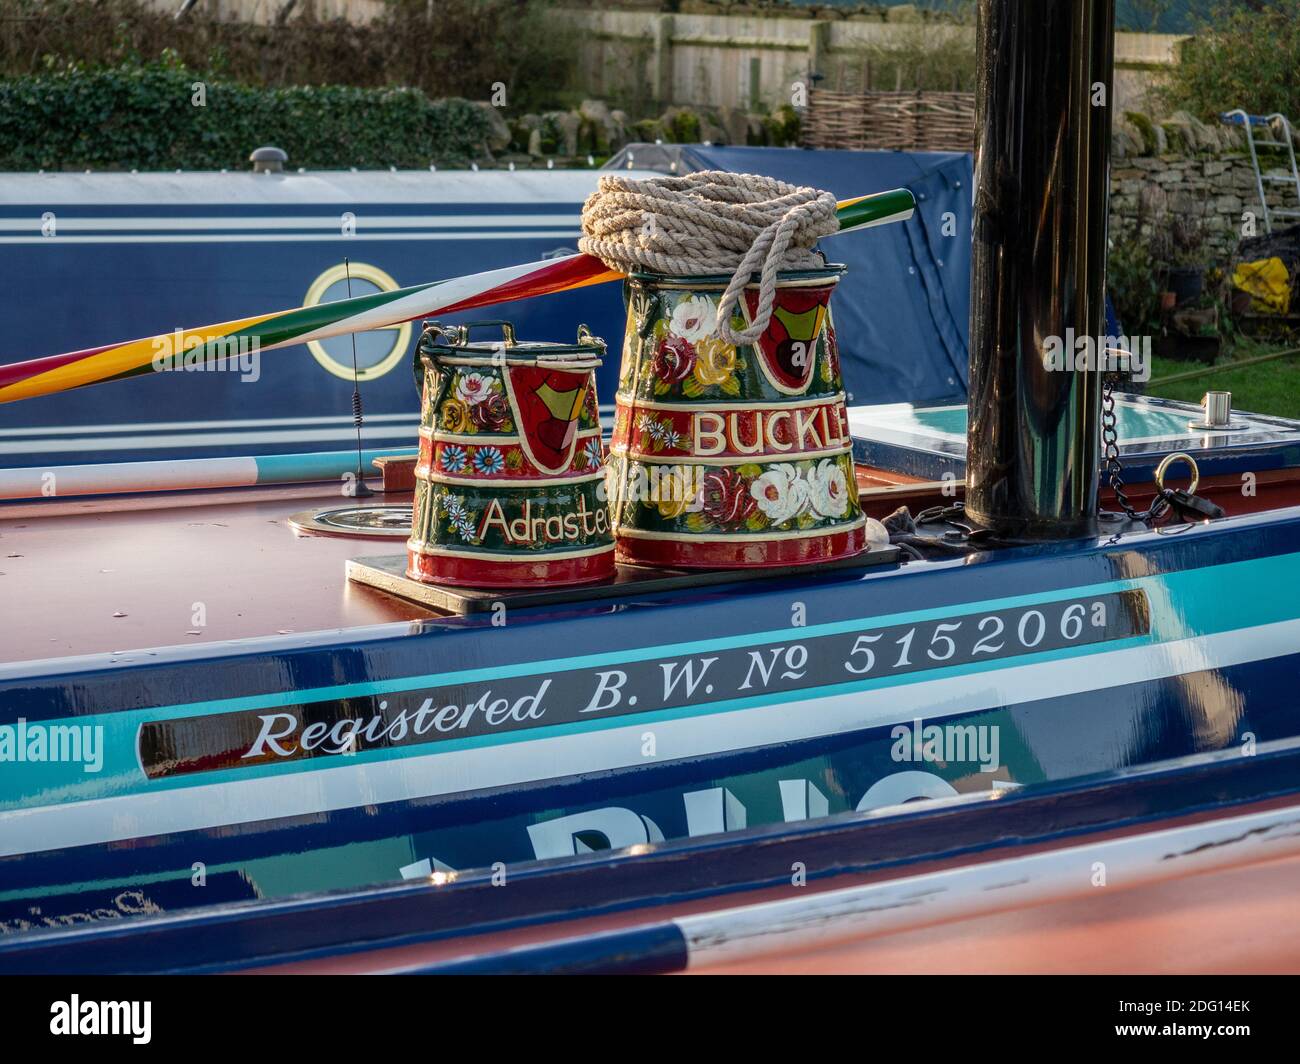 Buckby watering cans decorated in Roses and Castles canal art, Stoke Bruerne, UK Stock Photo